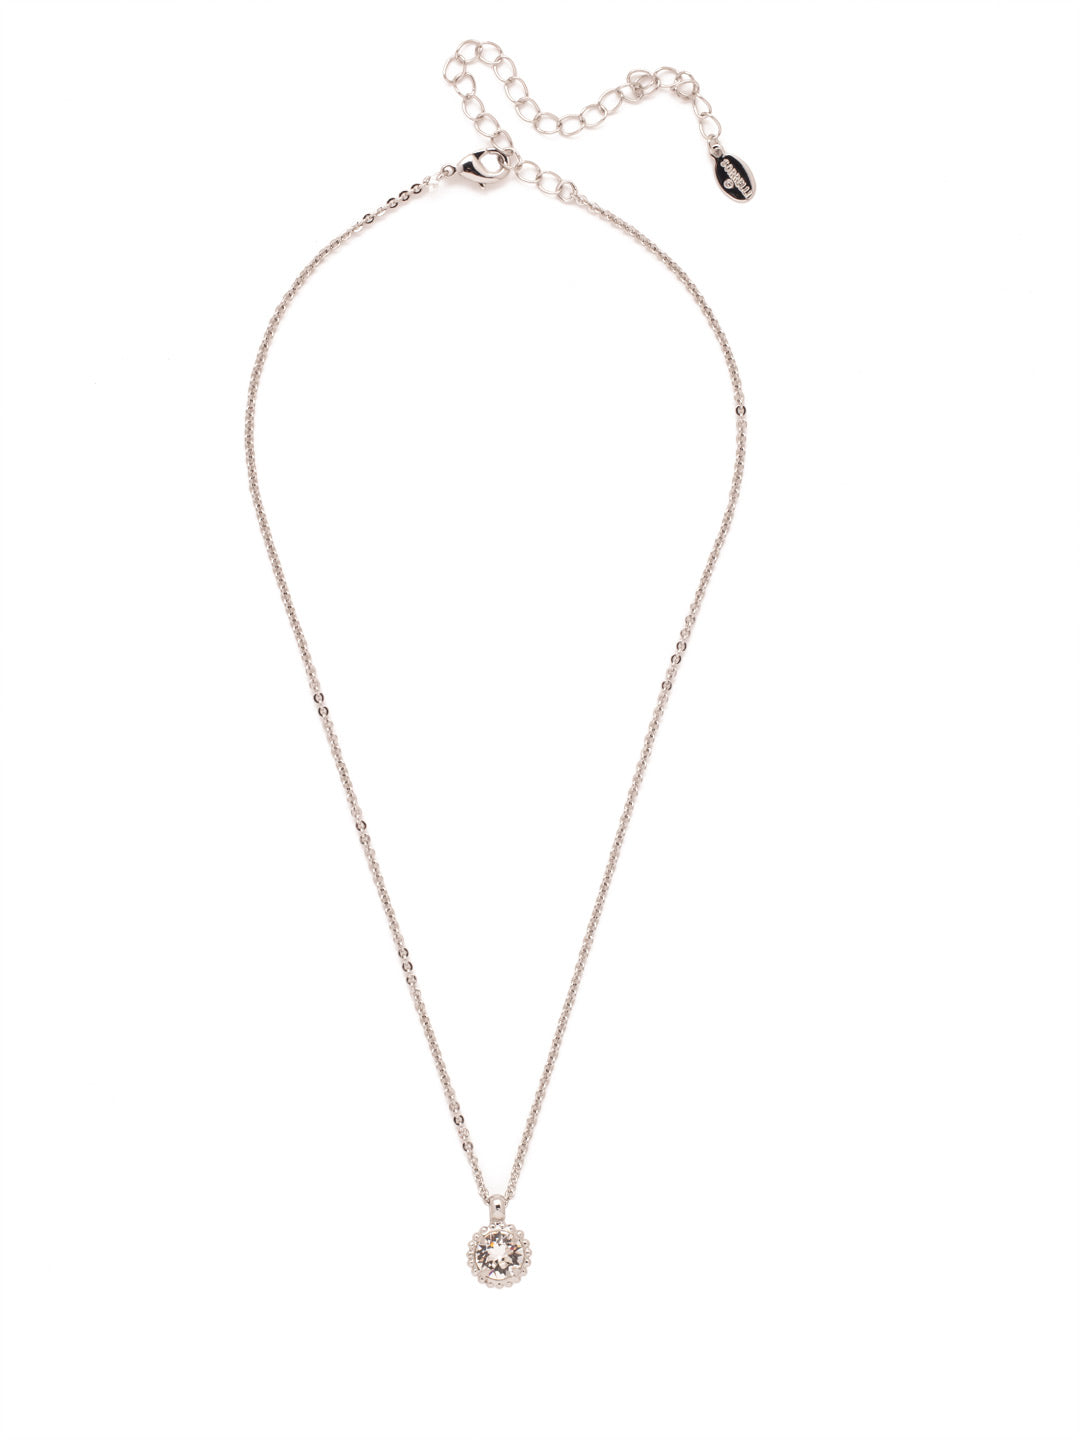 Simplicity Pendant Necklace - NBY38RHCRY